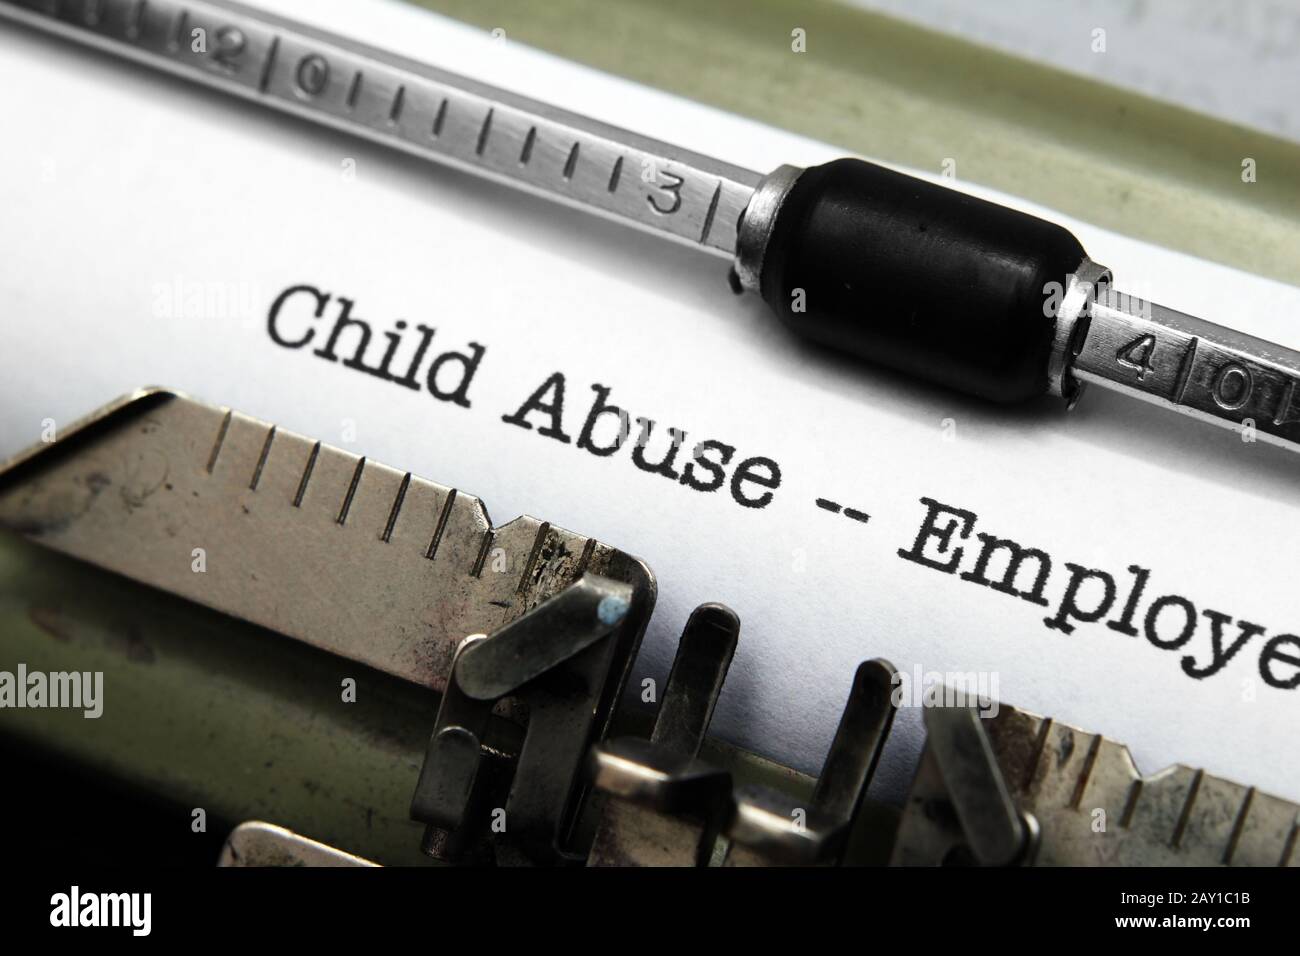 Child abuse form Stock Photo